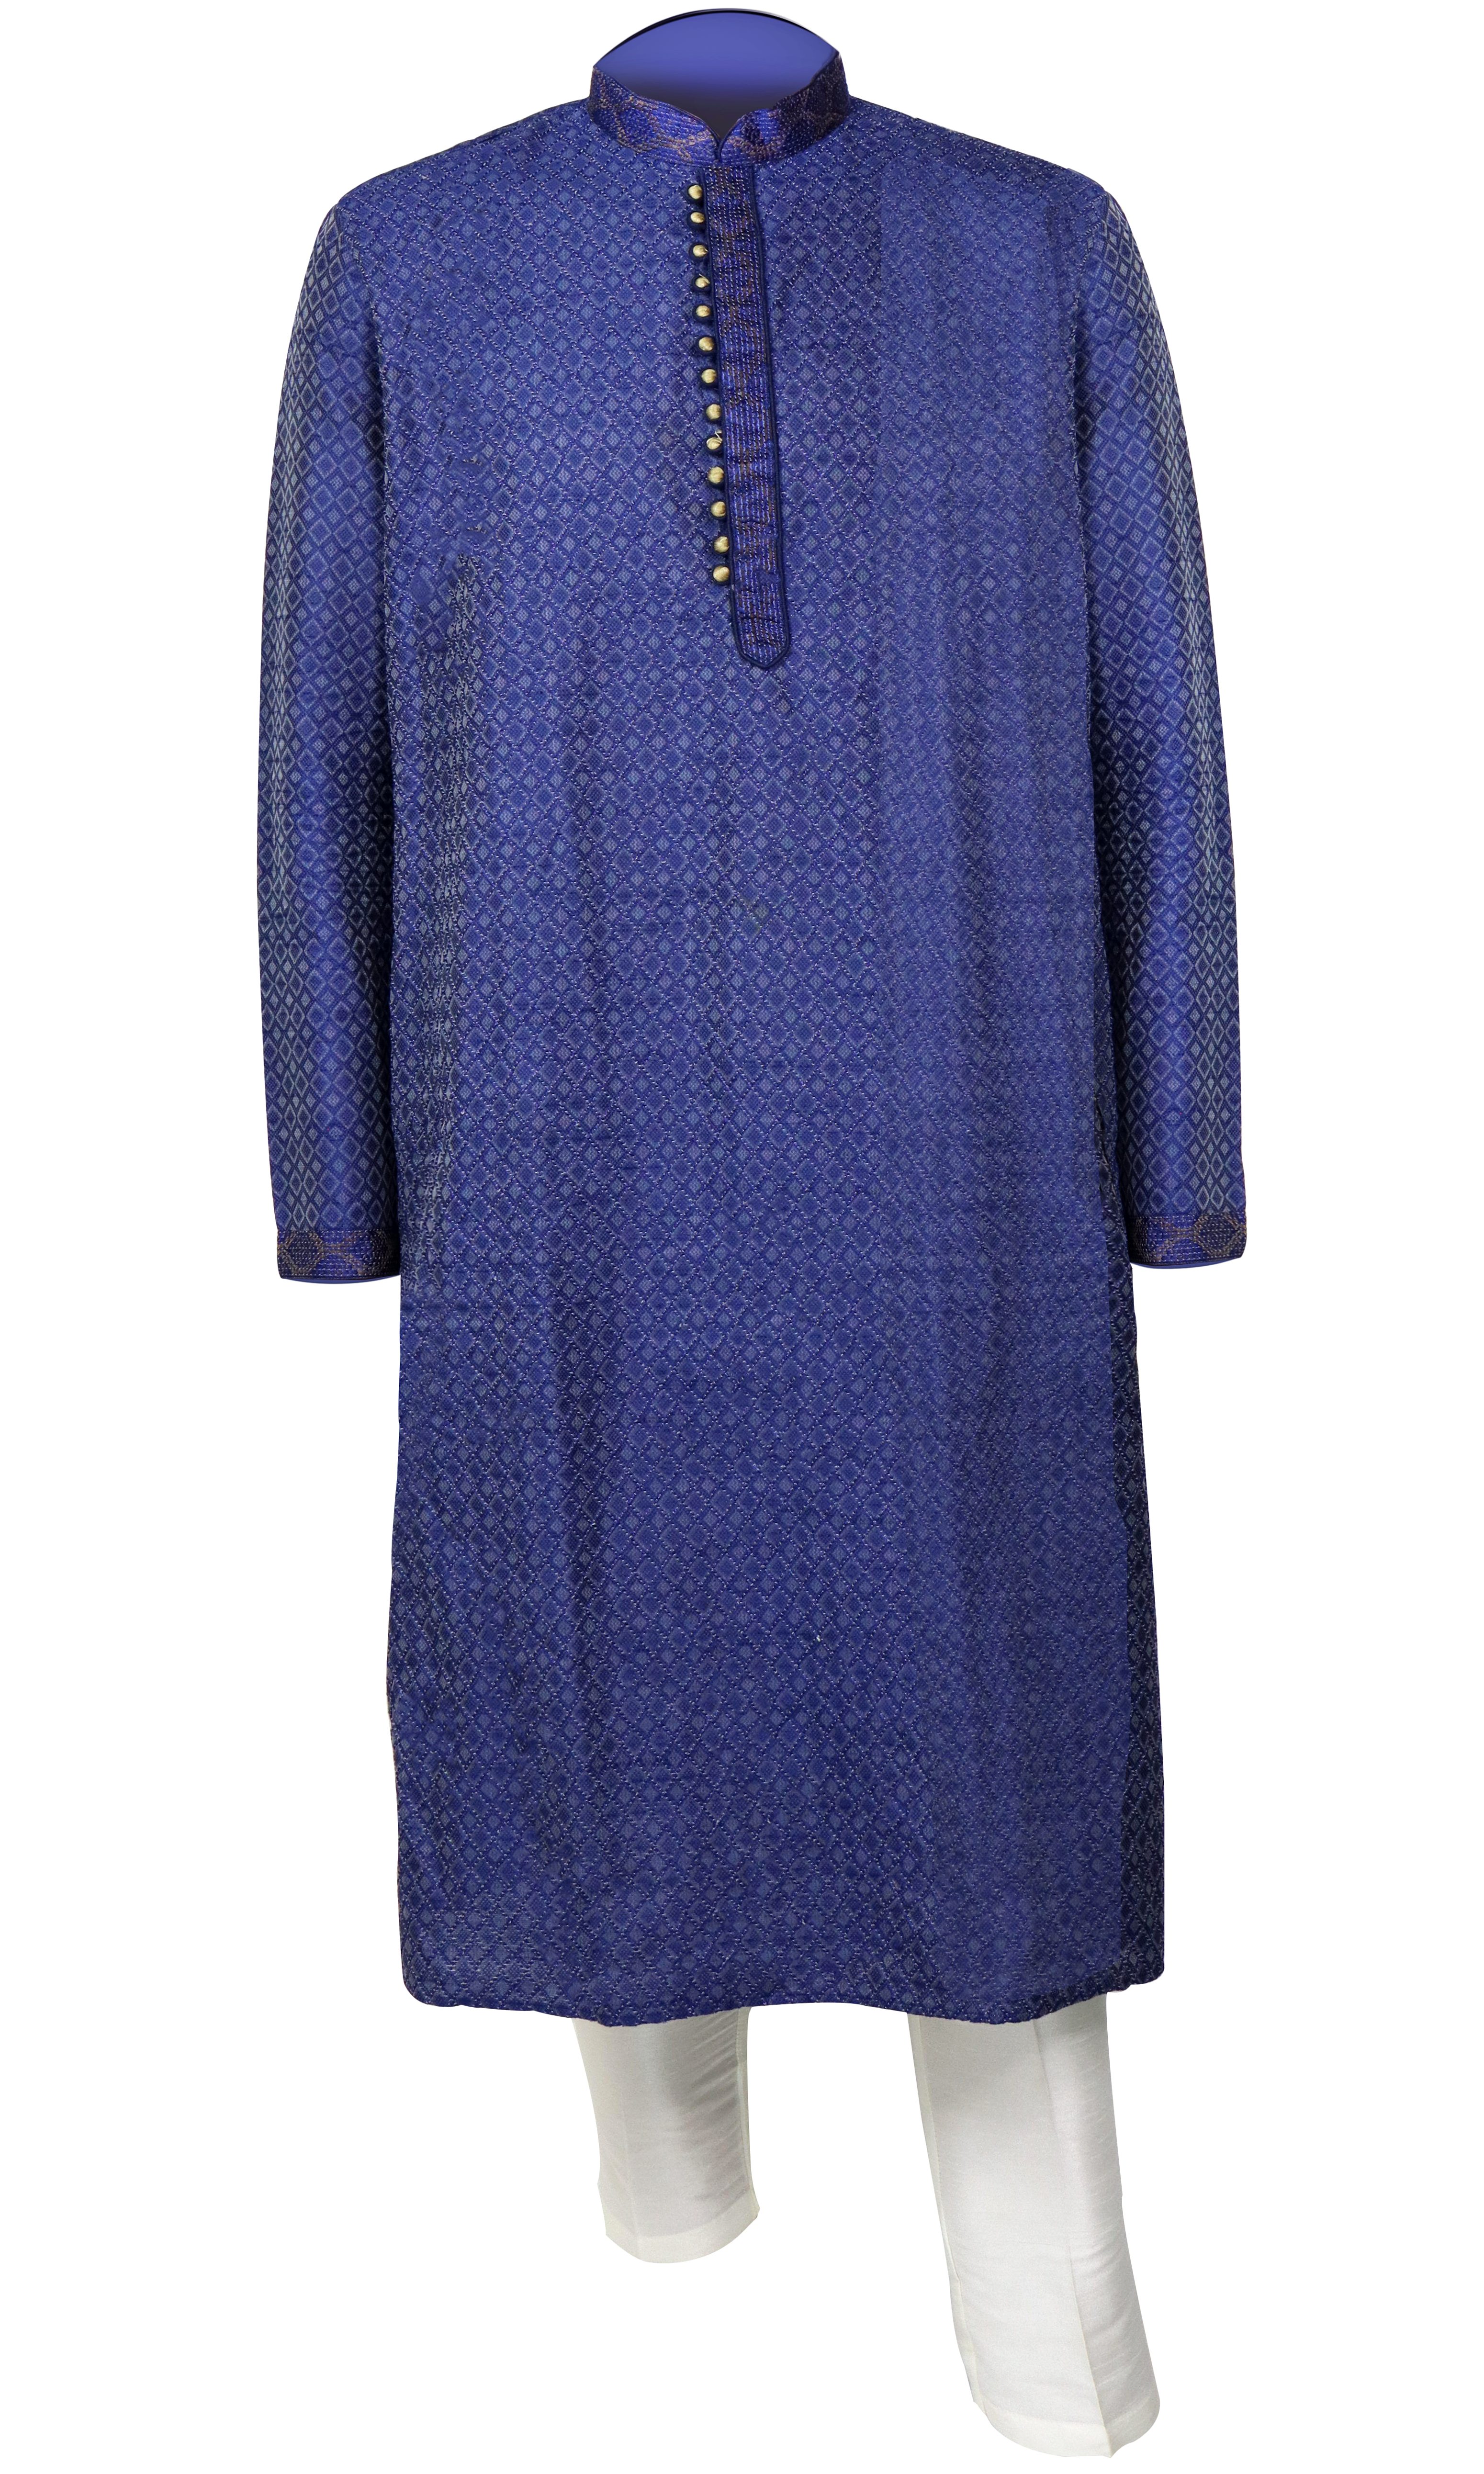 The Rich kurta is blue in color with blue threadwork. Pair it with your own pair of pants if you prefer!